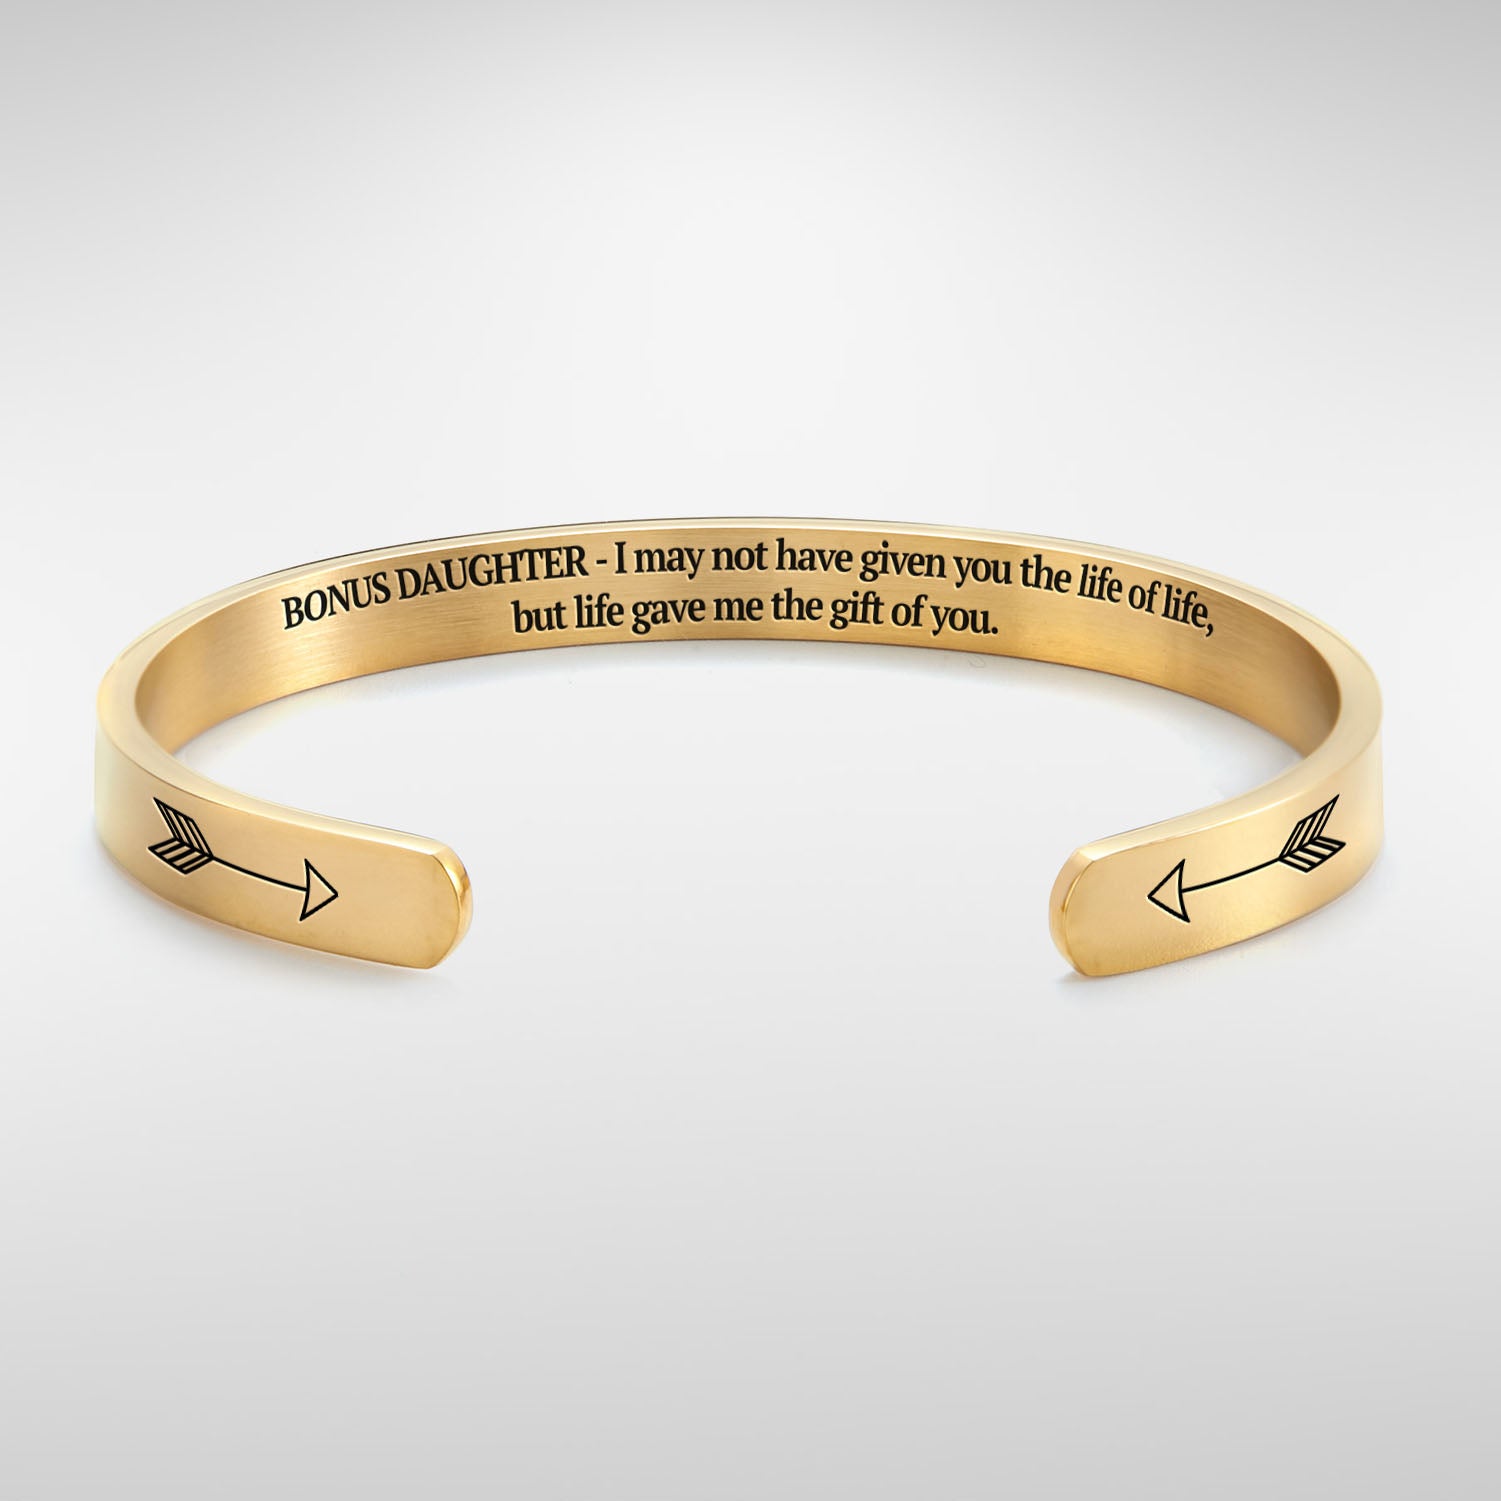 I may not have given you the gift of life but life gave me the gift of you bracelet with gold plating